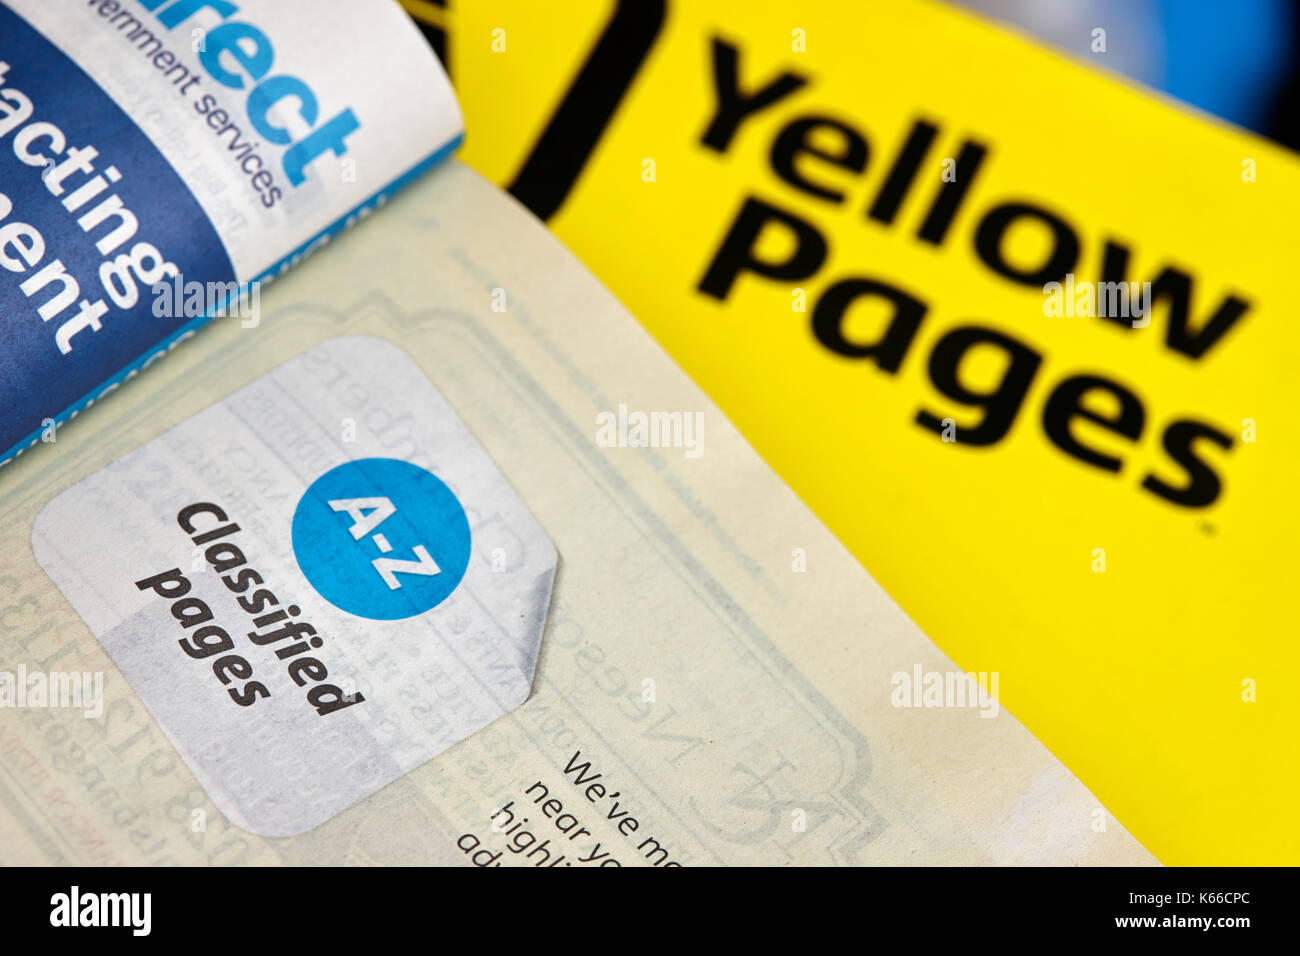 a-z yellow pages classified telephone directory paper edition uk Stock Photo